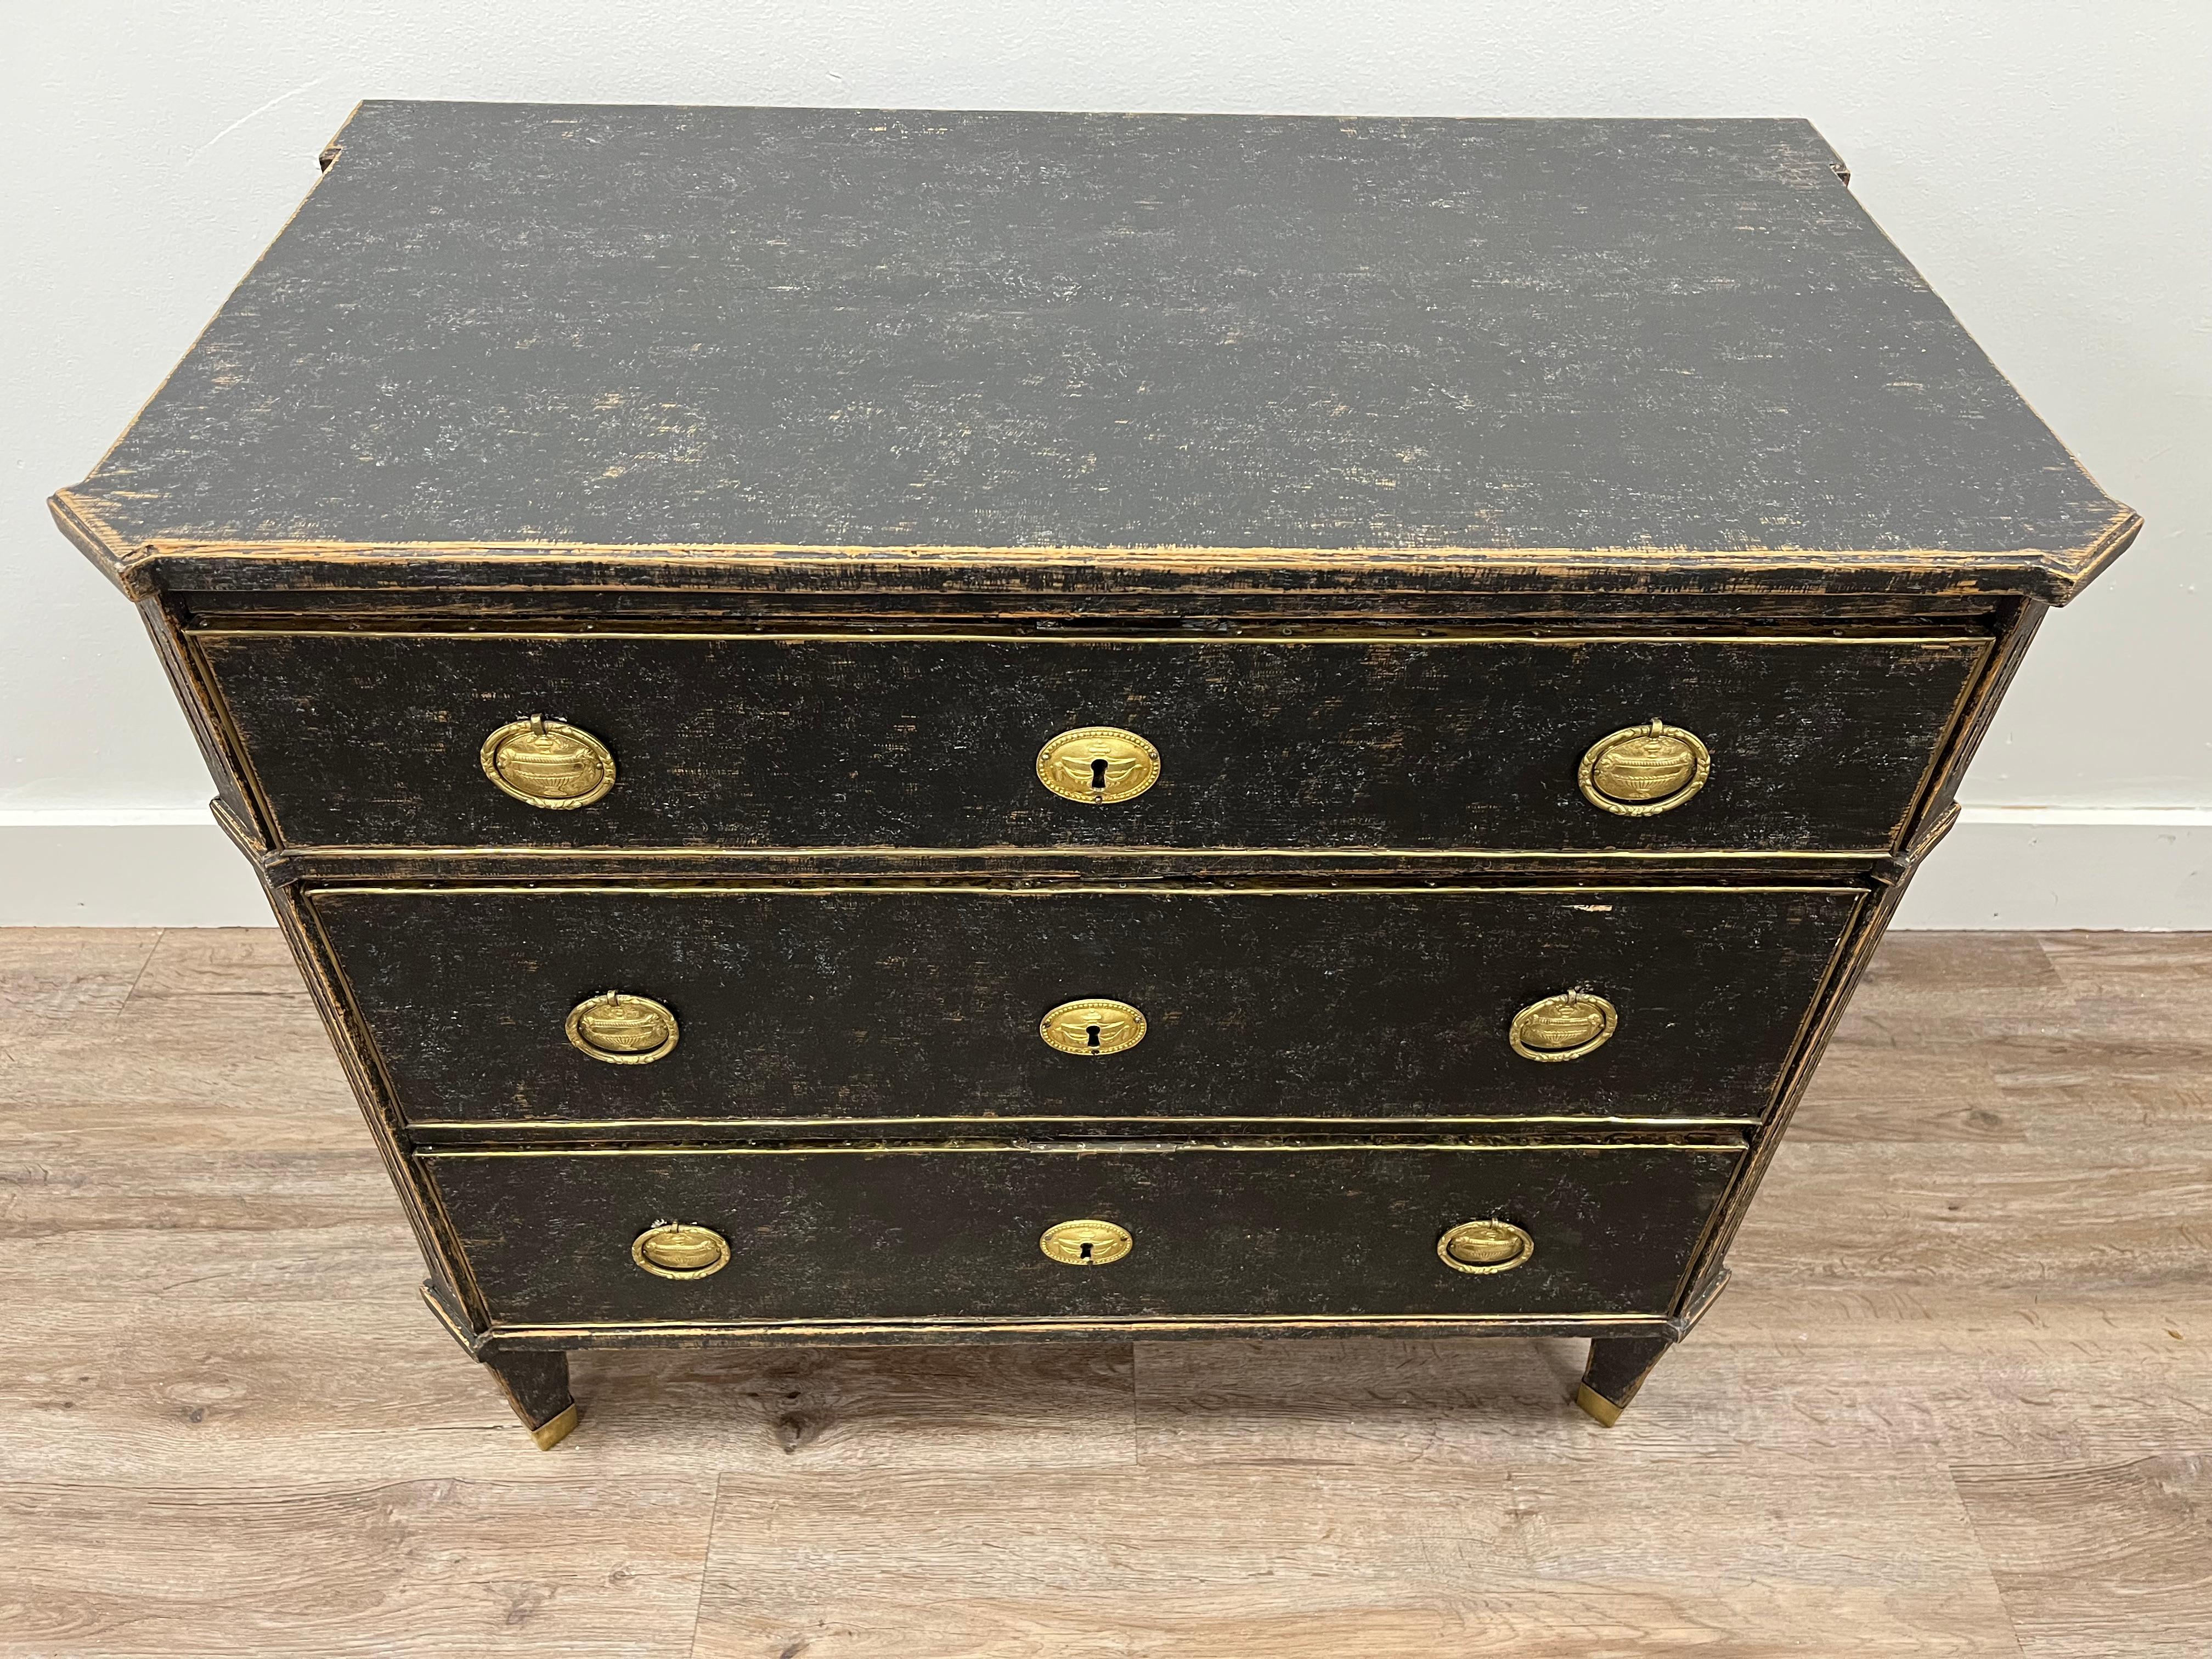 A Swedish Late Gustavian commode with original brass hardware and locks. Featuring canted and fluted corners. Drawer fronts outlined in brass. Sits on fluted and tapered feet with brass covers. Tastefully repainted in black. 